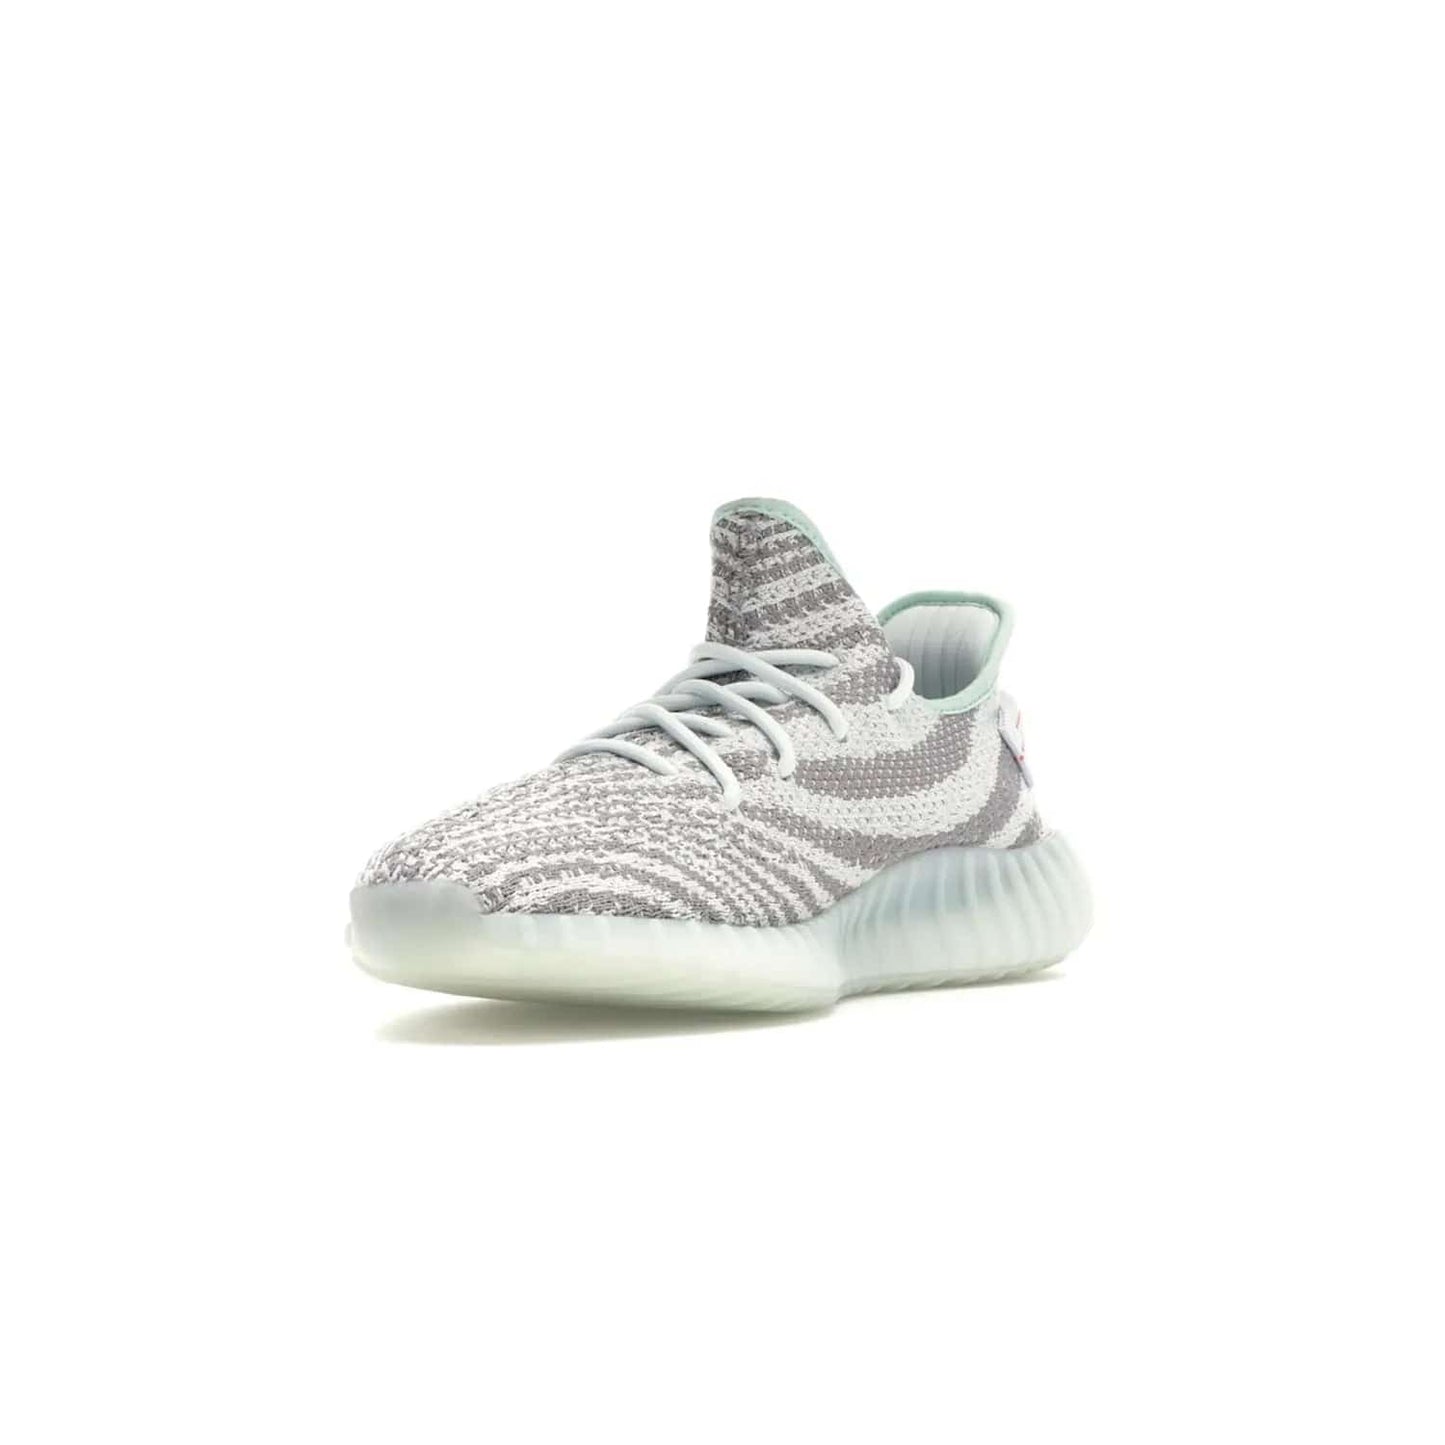 adidas Yeezy Boost 350 V2 Blue Tint - Image 14 - Only at www.BallersClubKickz.com - The adidas Yeezy Boost 350 V2 Blue Tint merges fashion and functionality with its Primeknit upper and Boost sole. Released in December 2017, this luxurious sneaker is perfect for making a stylish statement.